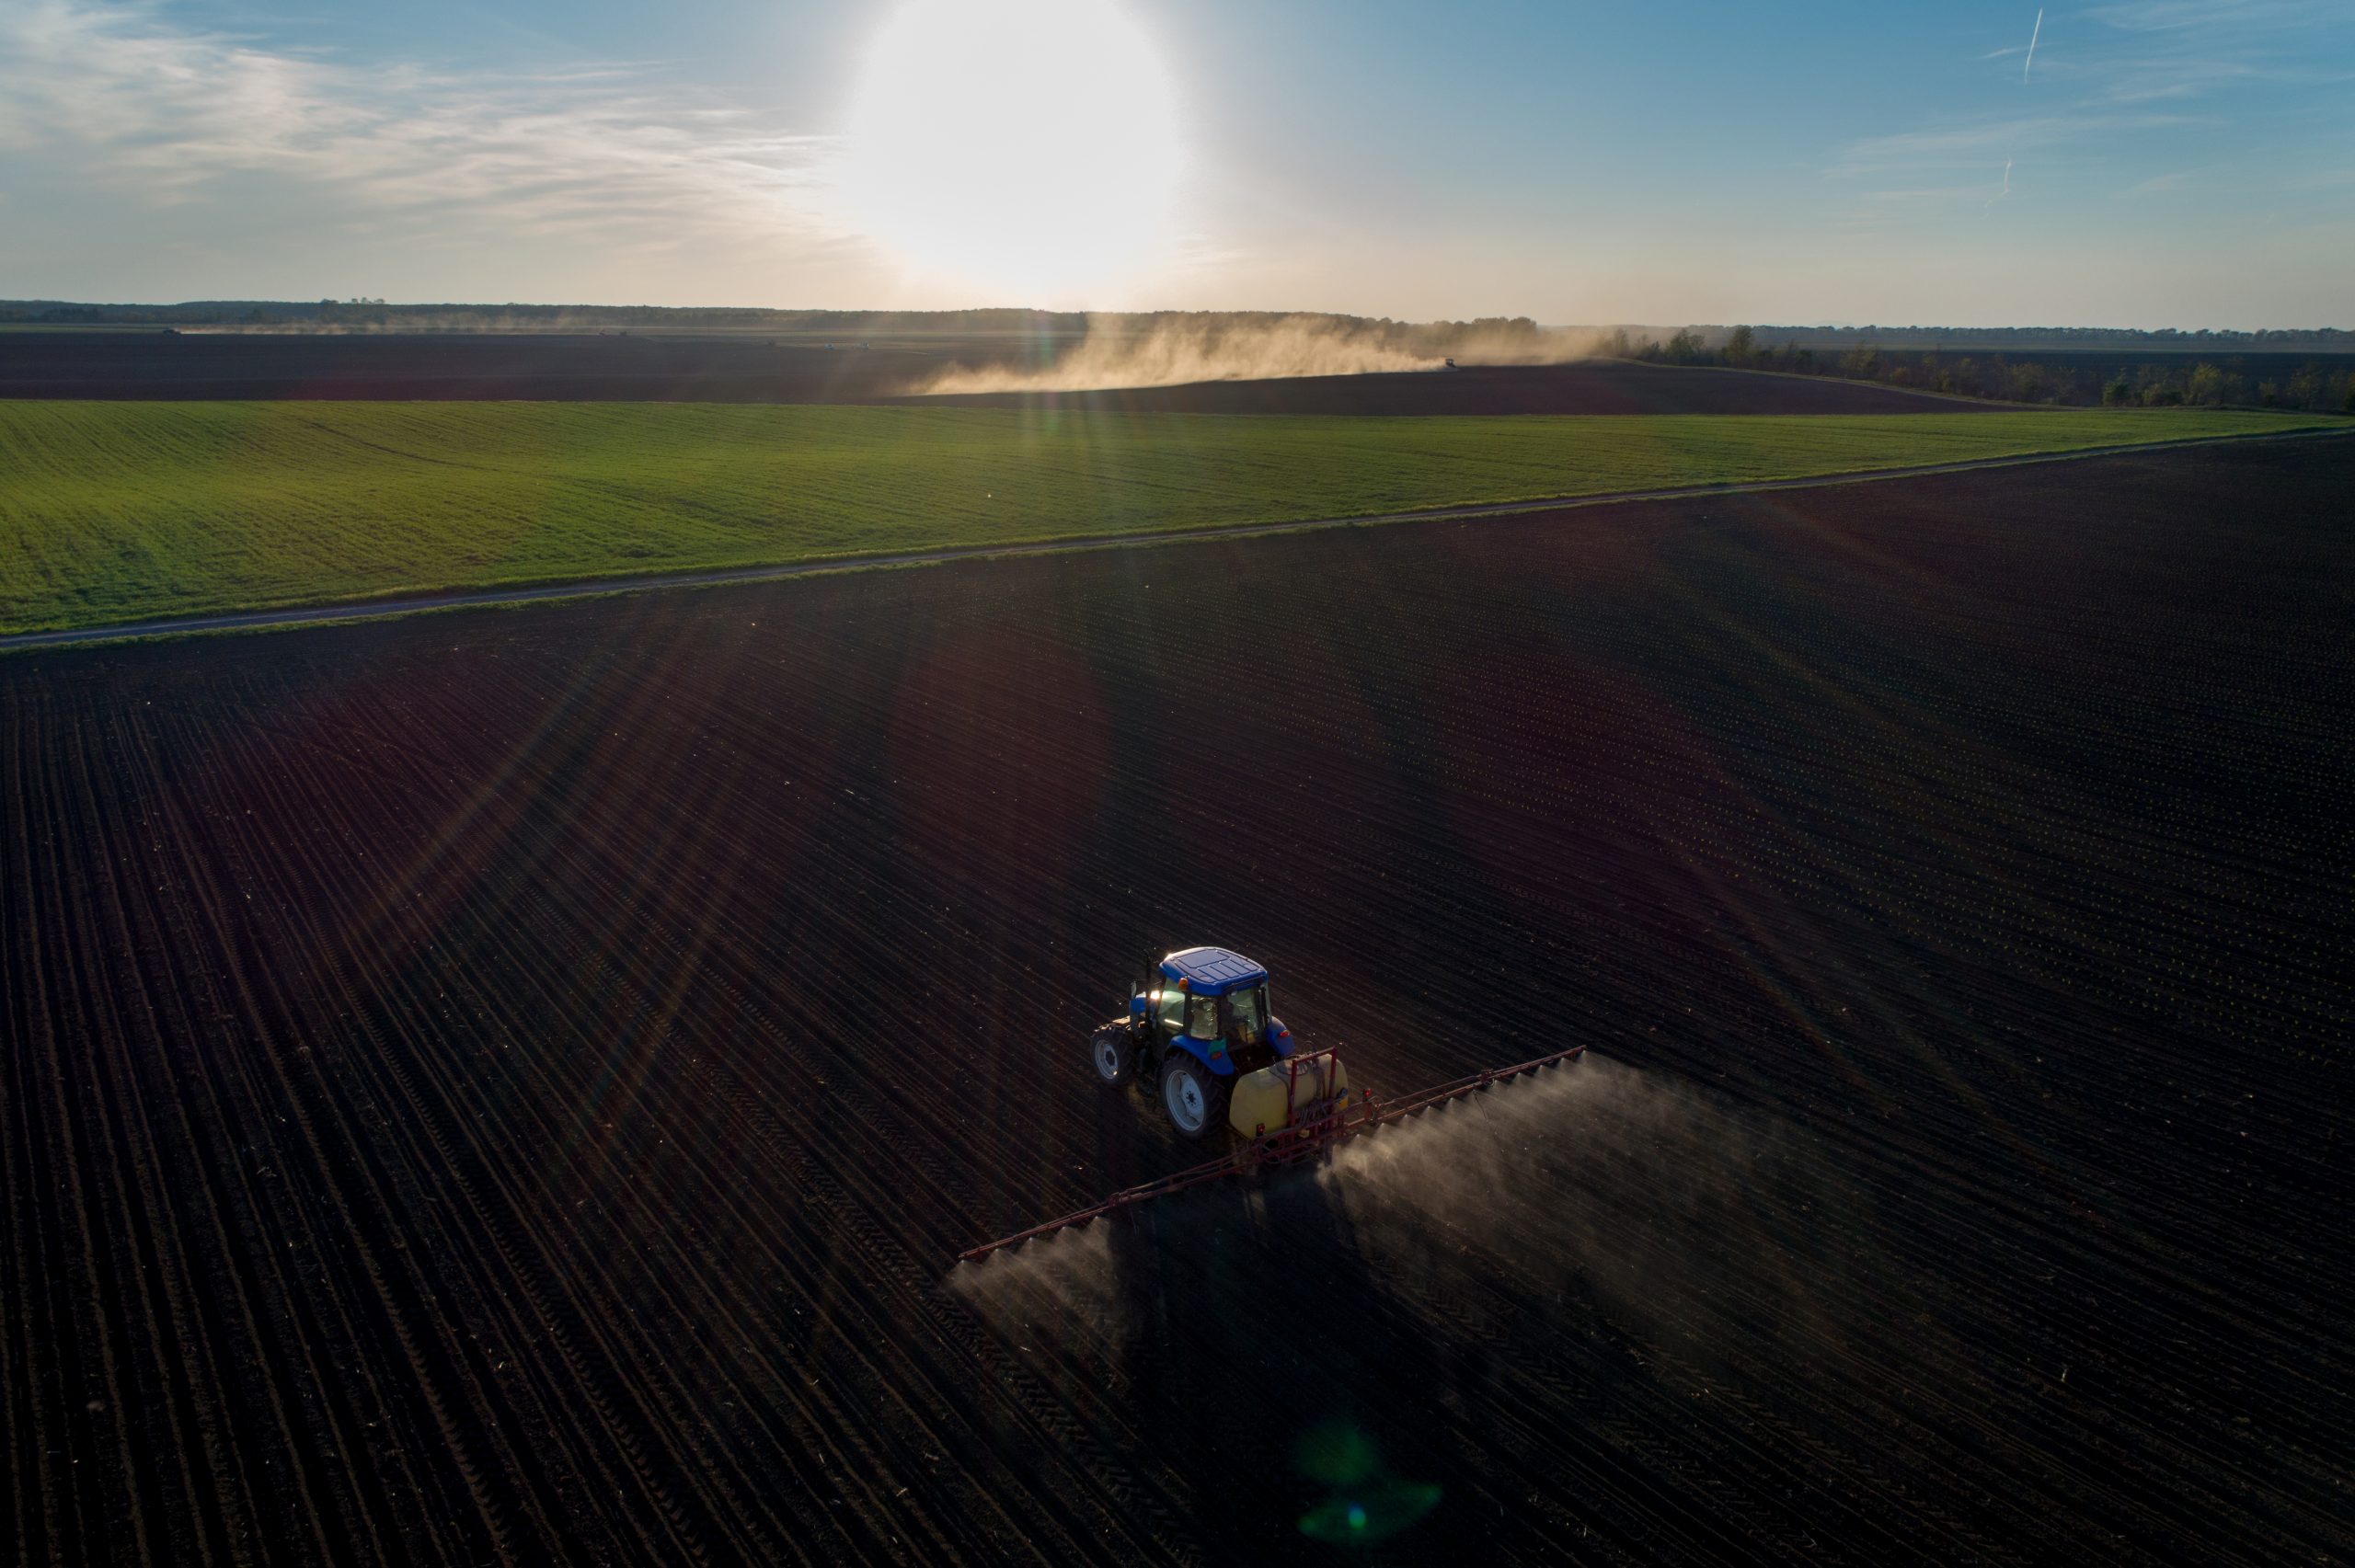 Tractor spraying artificial fertilizer on soil in spring time. Shoot from drone at the evening